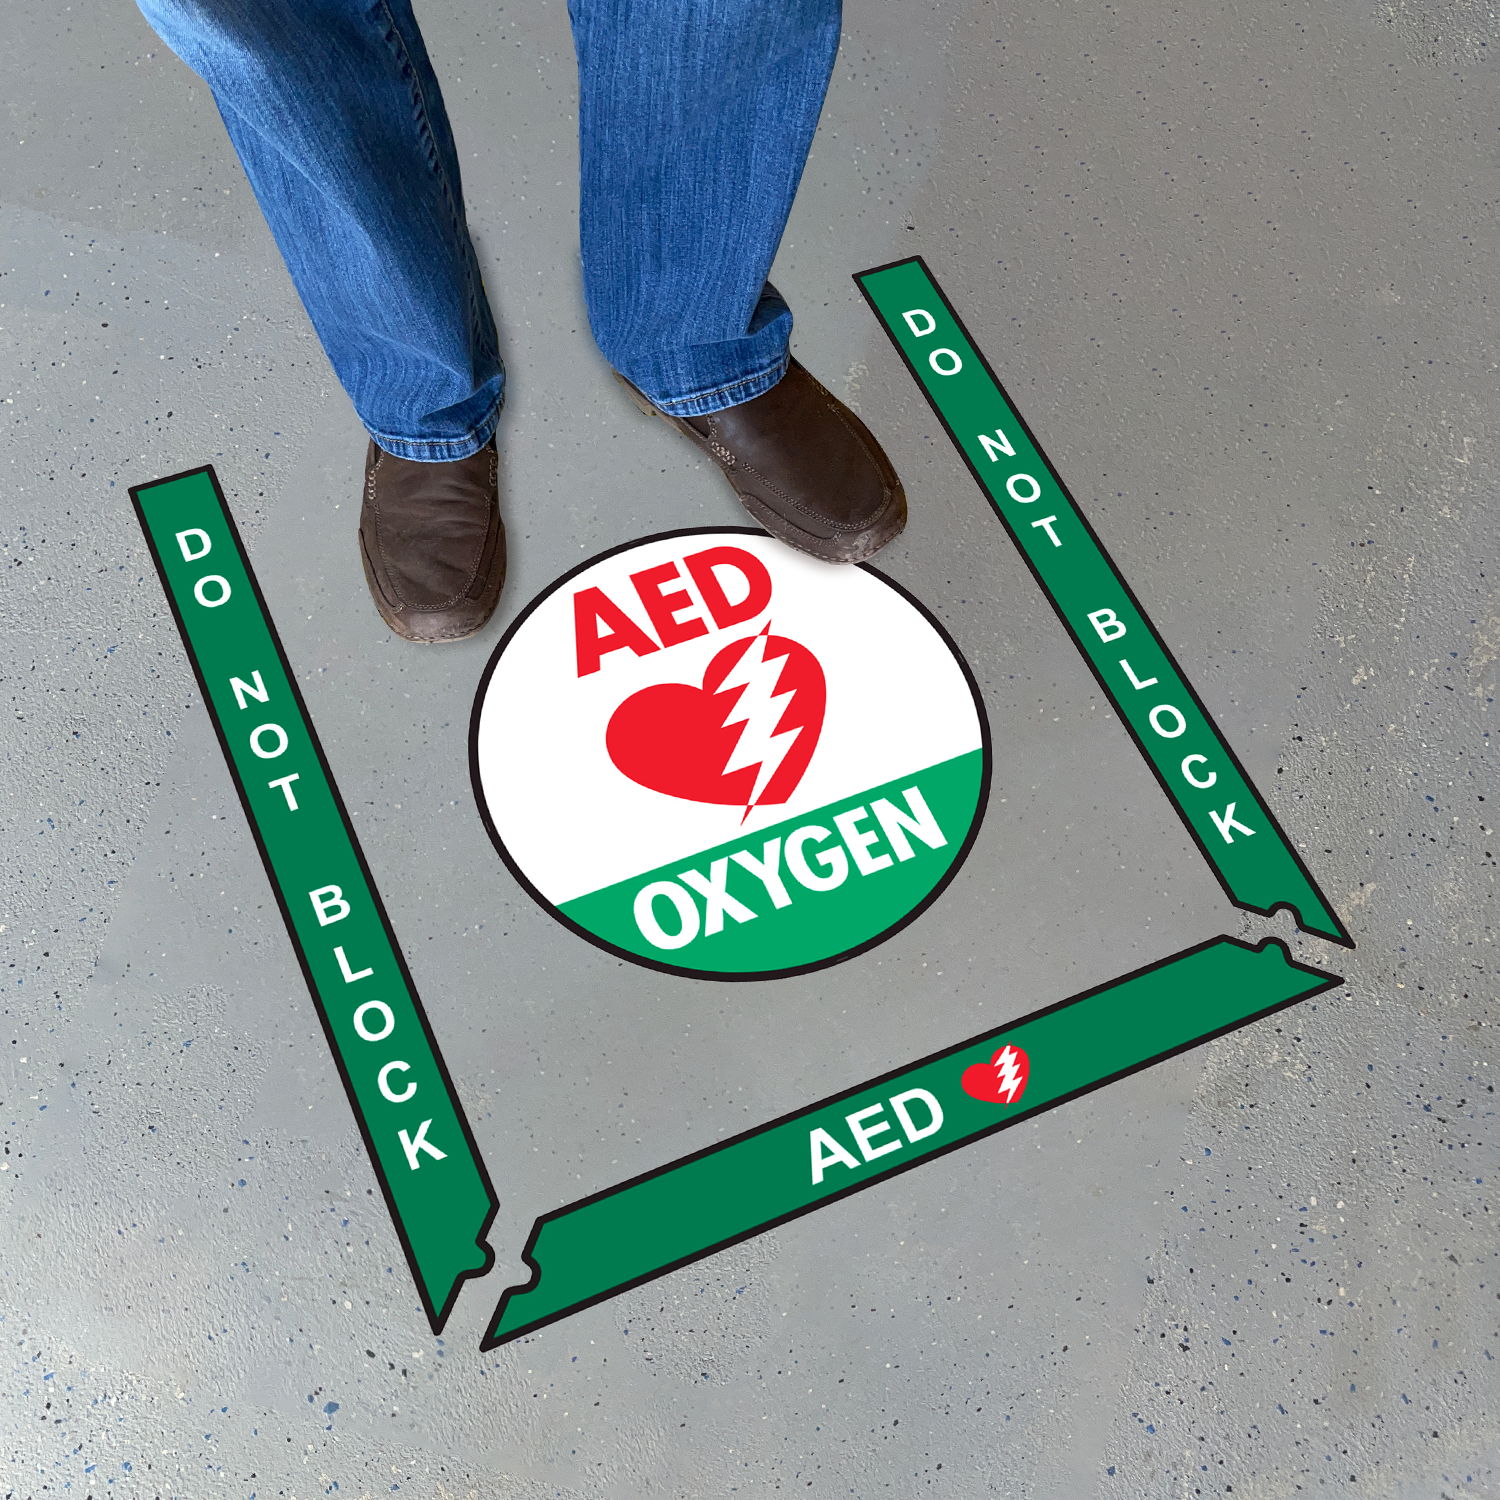 Superior Mark® - Floor Tape, Safety Messages & Floor Sign Kits